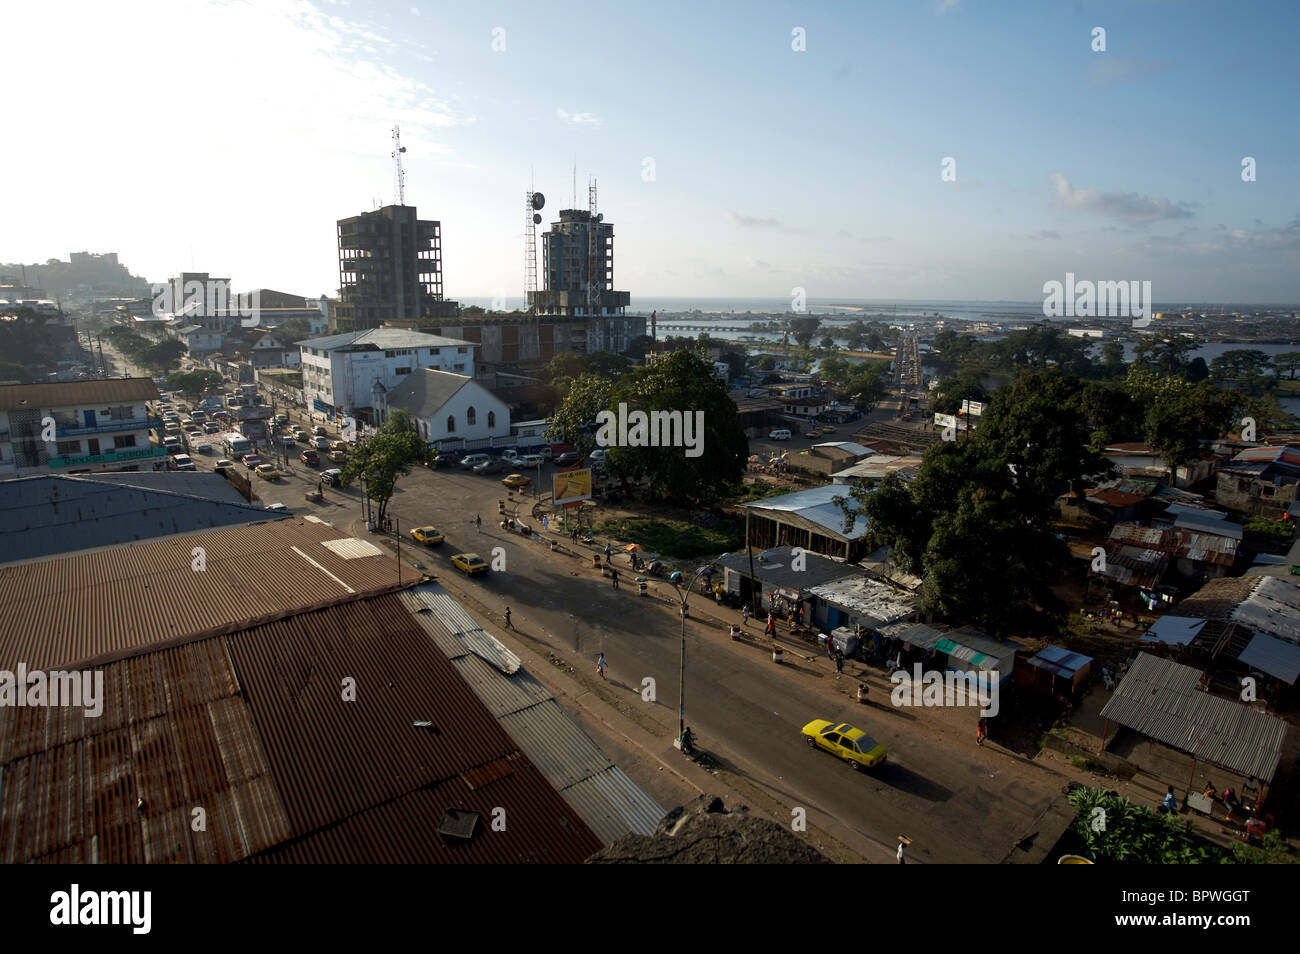 Liberia recovers from decades of civil war. Stock Photo